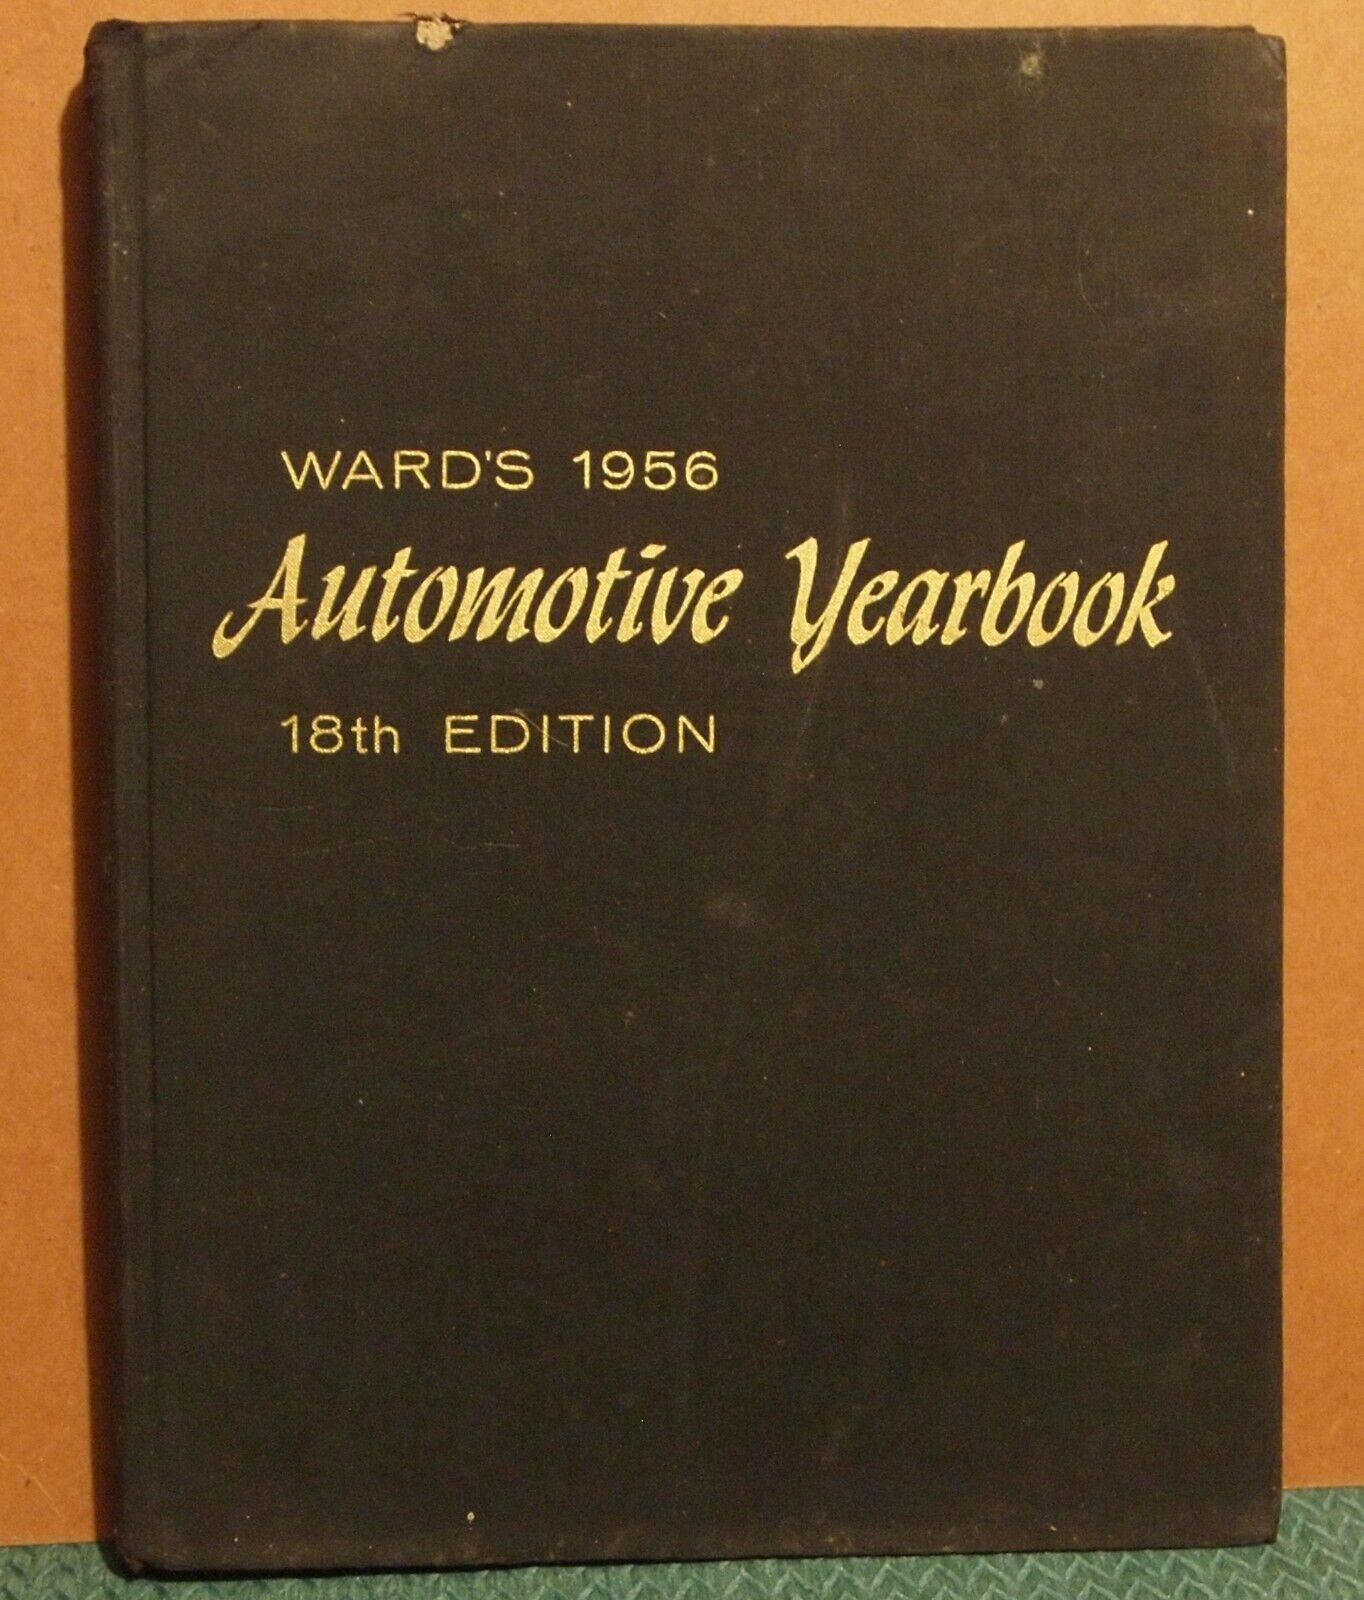 1956 WARD'S AUTOMOTIVE YEARBOOK 18th edition WARDS-01